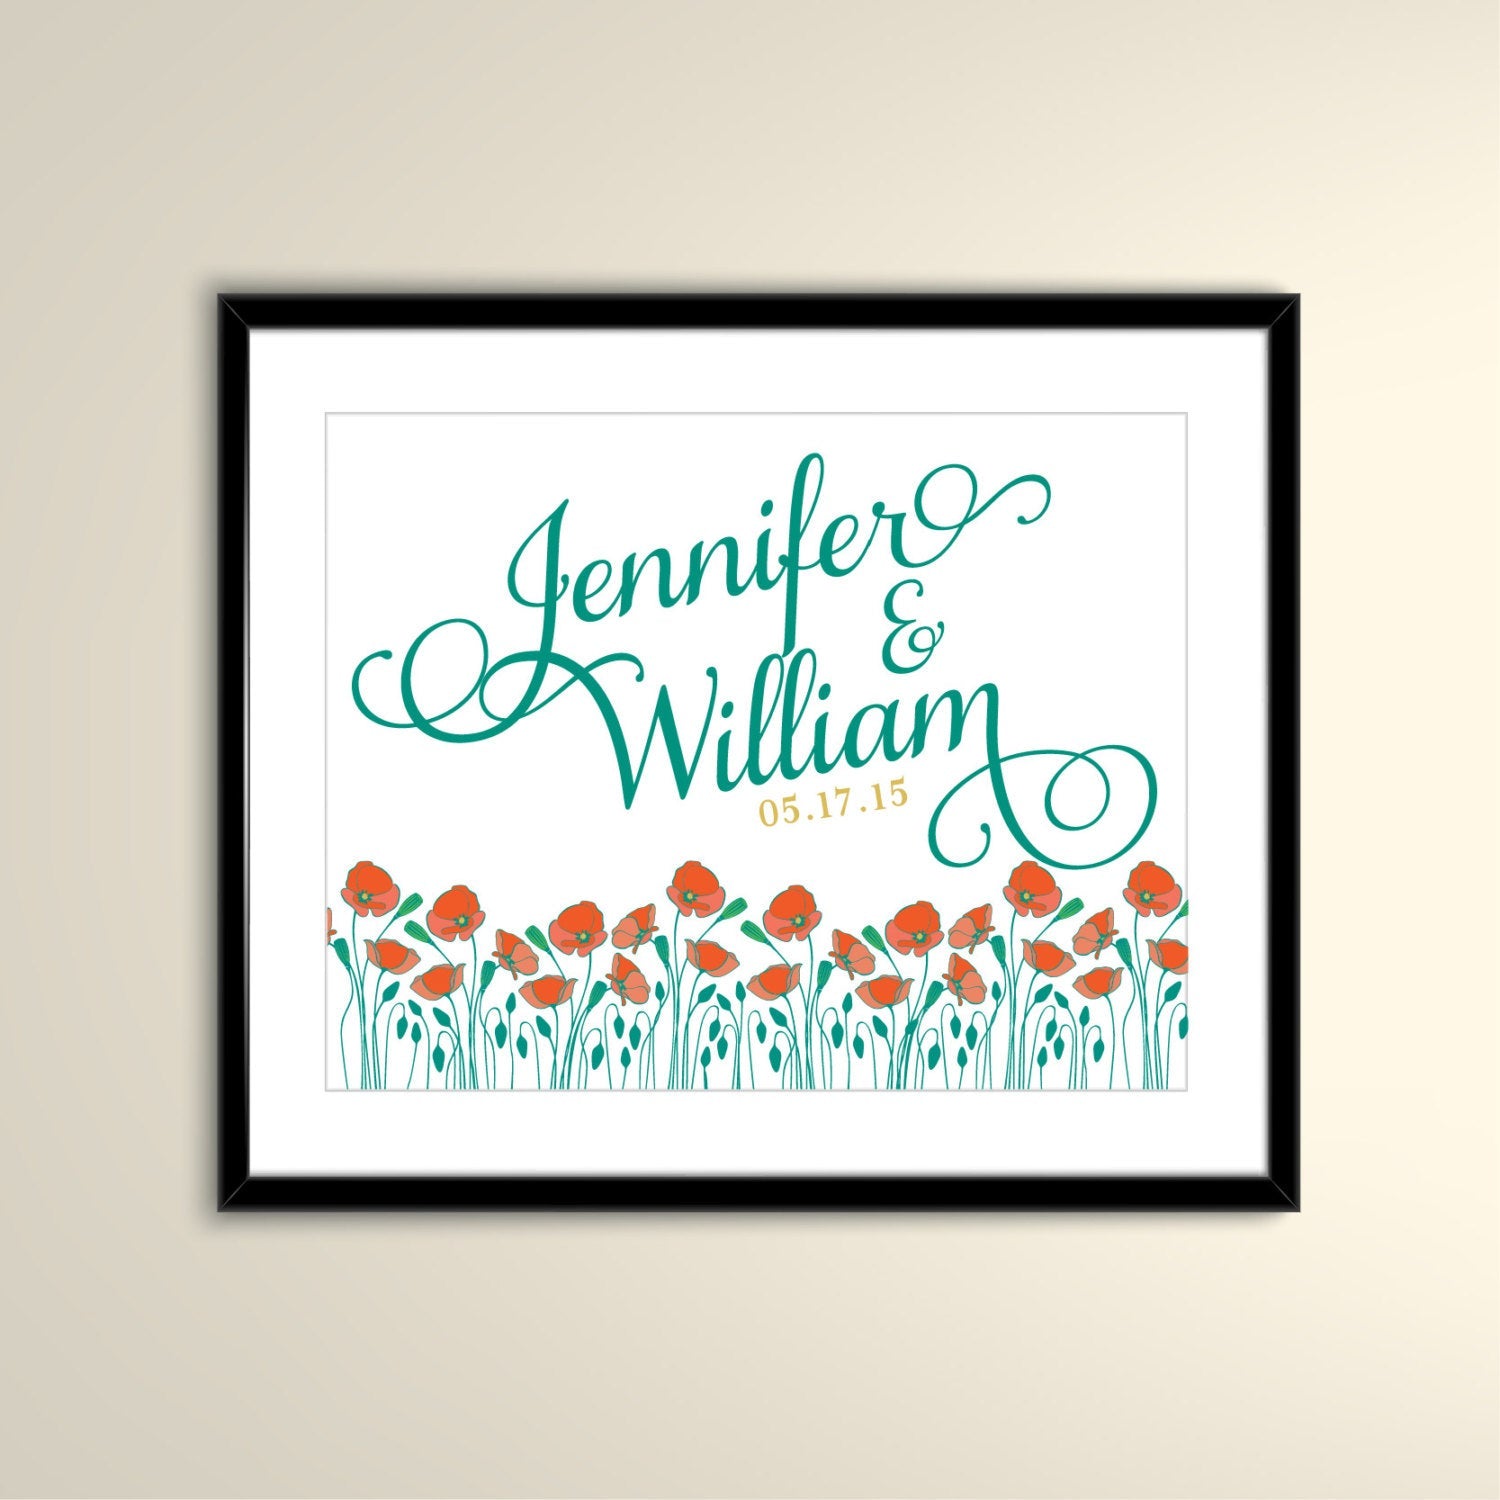 Vintage Poppies Emerald and Gold 11x14 Paper Poster - Wedding Poster personalized with Names and date (frame not included)